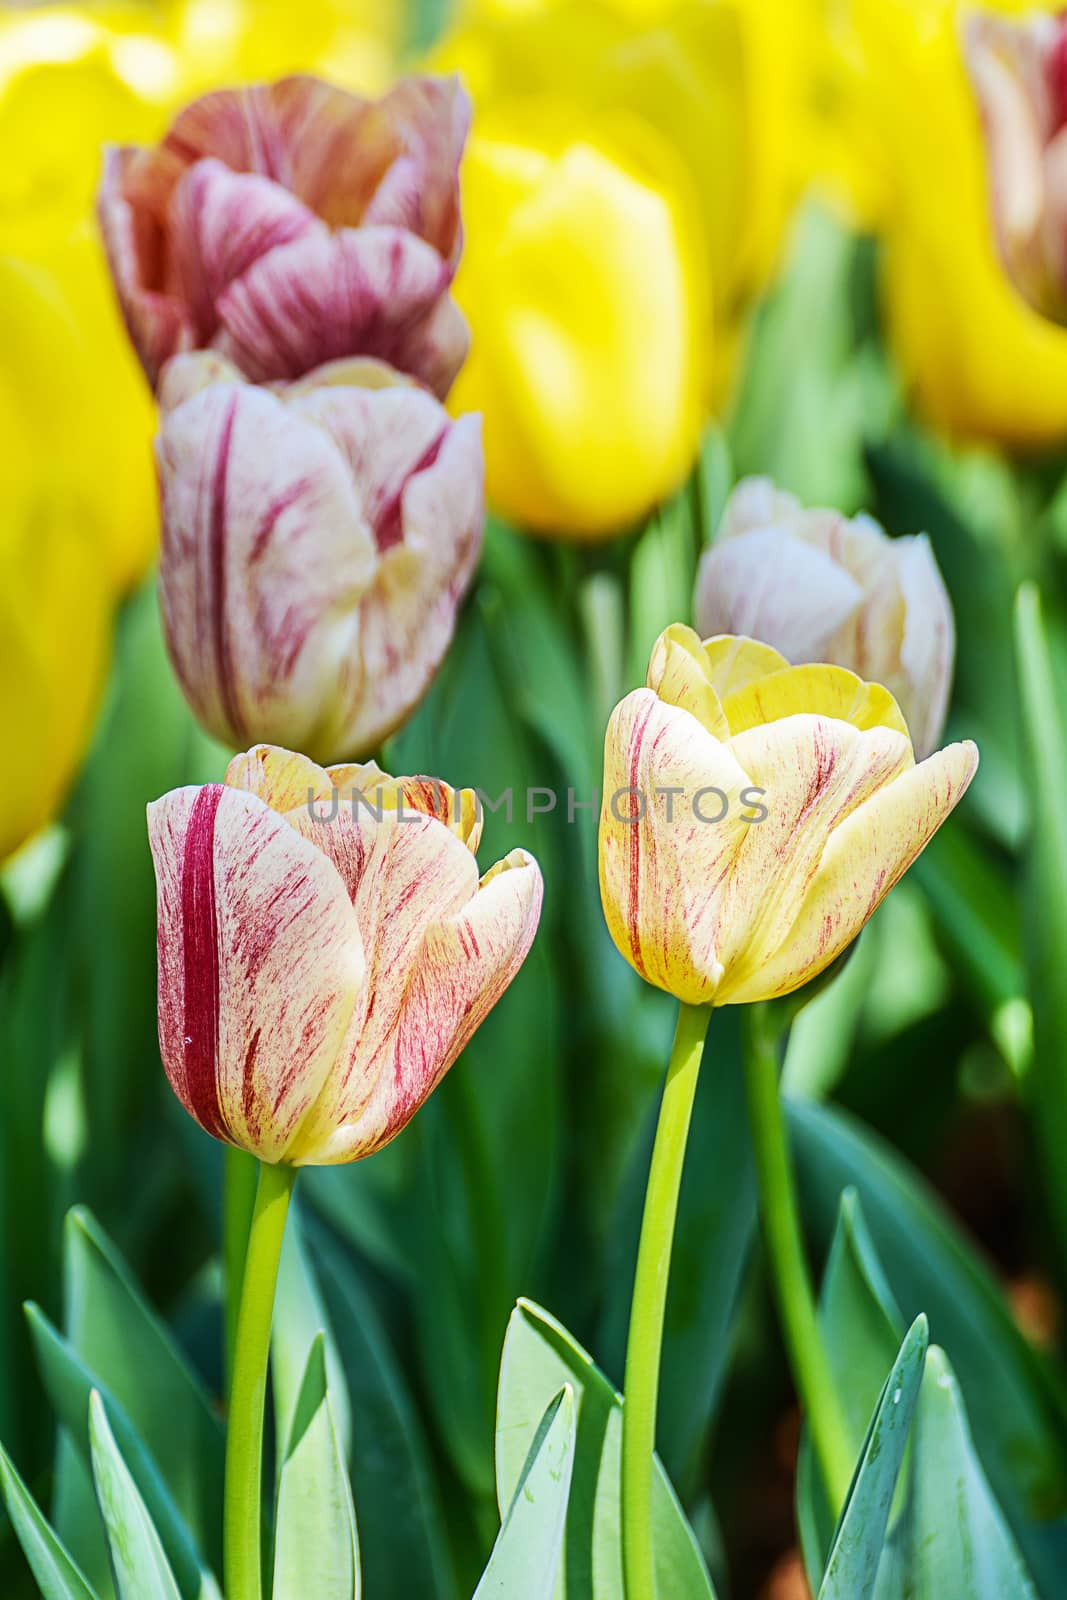 Beautiful bouquet of tulips. colorful tulips in the garden